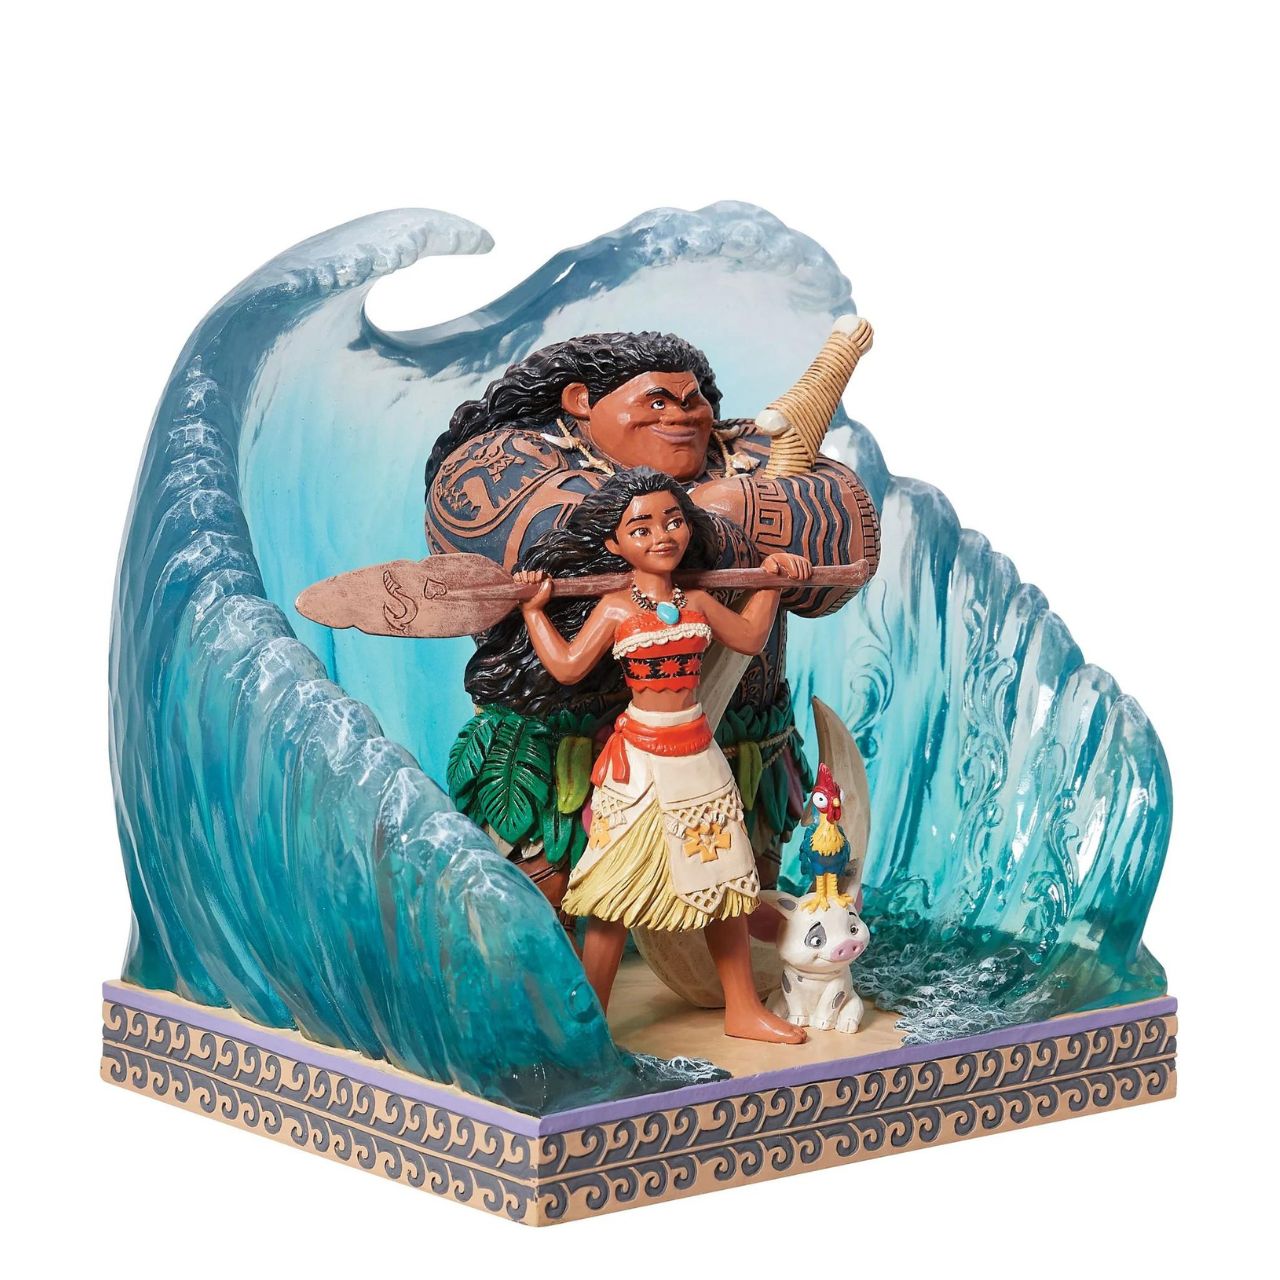 Moana Movie Poster Movie Scene  This powerful carved by heart captures the essence of the 2016 Disney film Moana, featuring herself, Maui, Hei Hei the Rooster and Pua the Pig. Designed by award winning artist Jim Shore, hand crafted using high quality cast stone and hand painted.